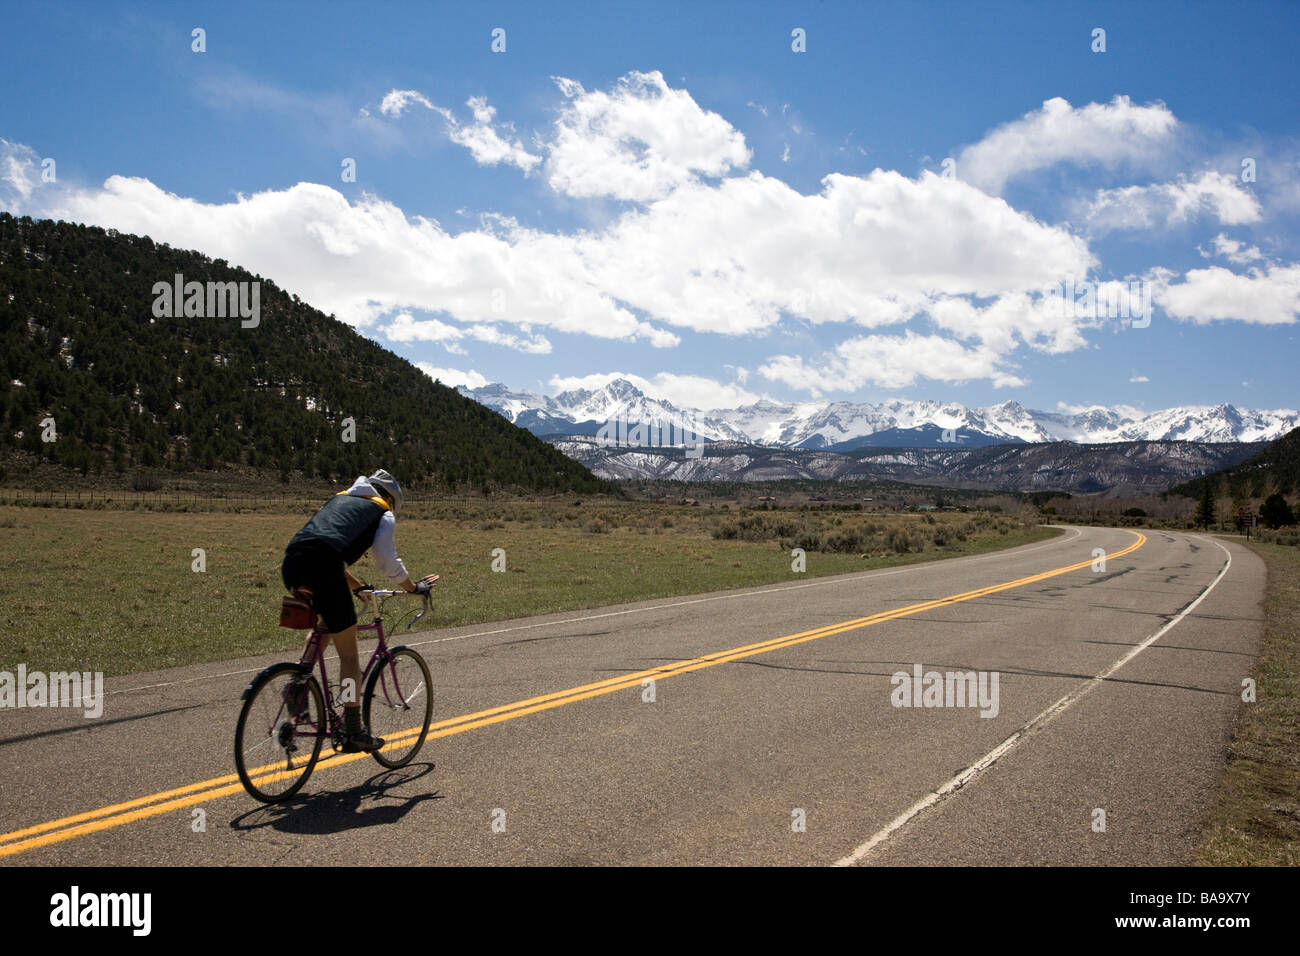 Bicyclist on a road in Ridgeway State Park near Ridgeway Colorado San Juan Mountains and Uncompahgre National Forest in distance Stock Photo